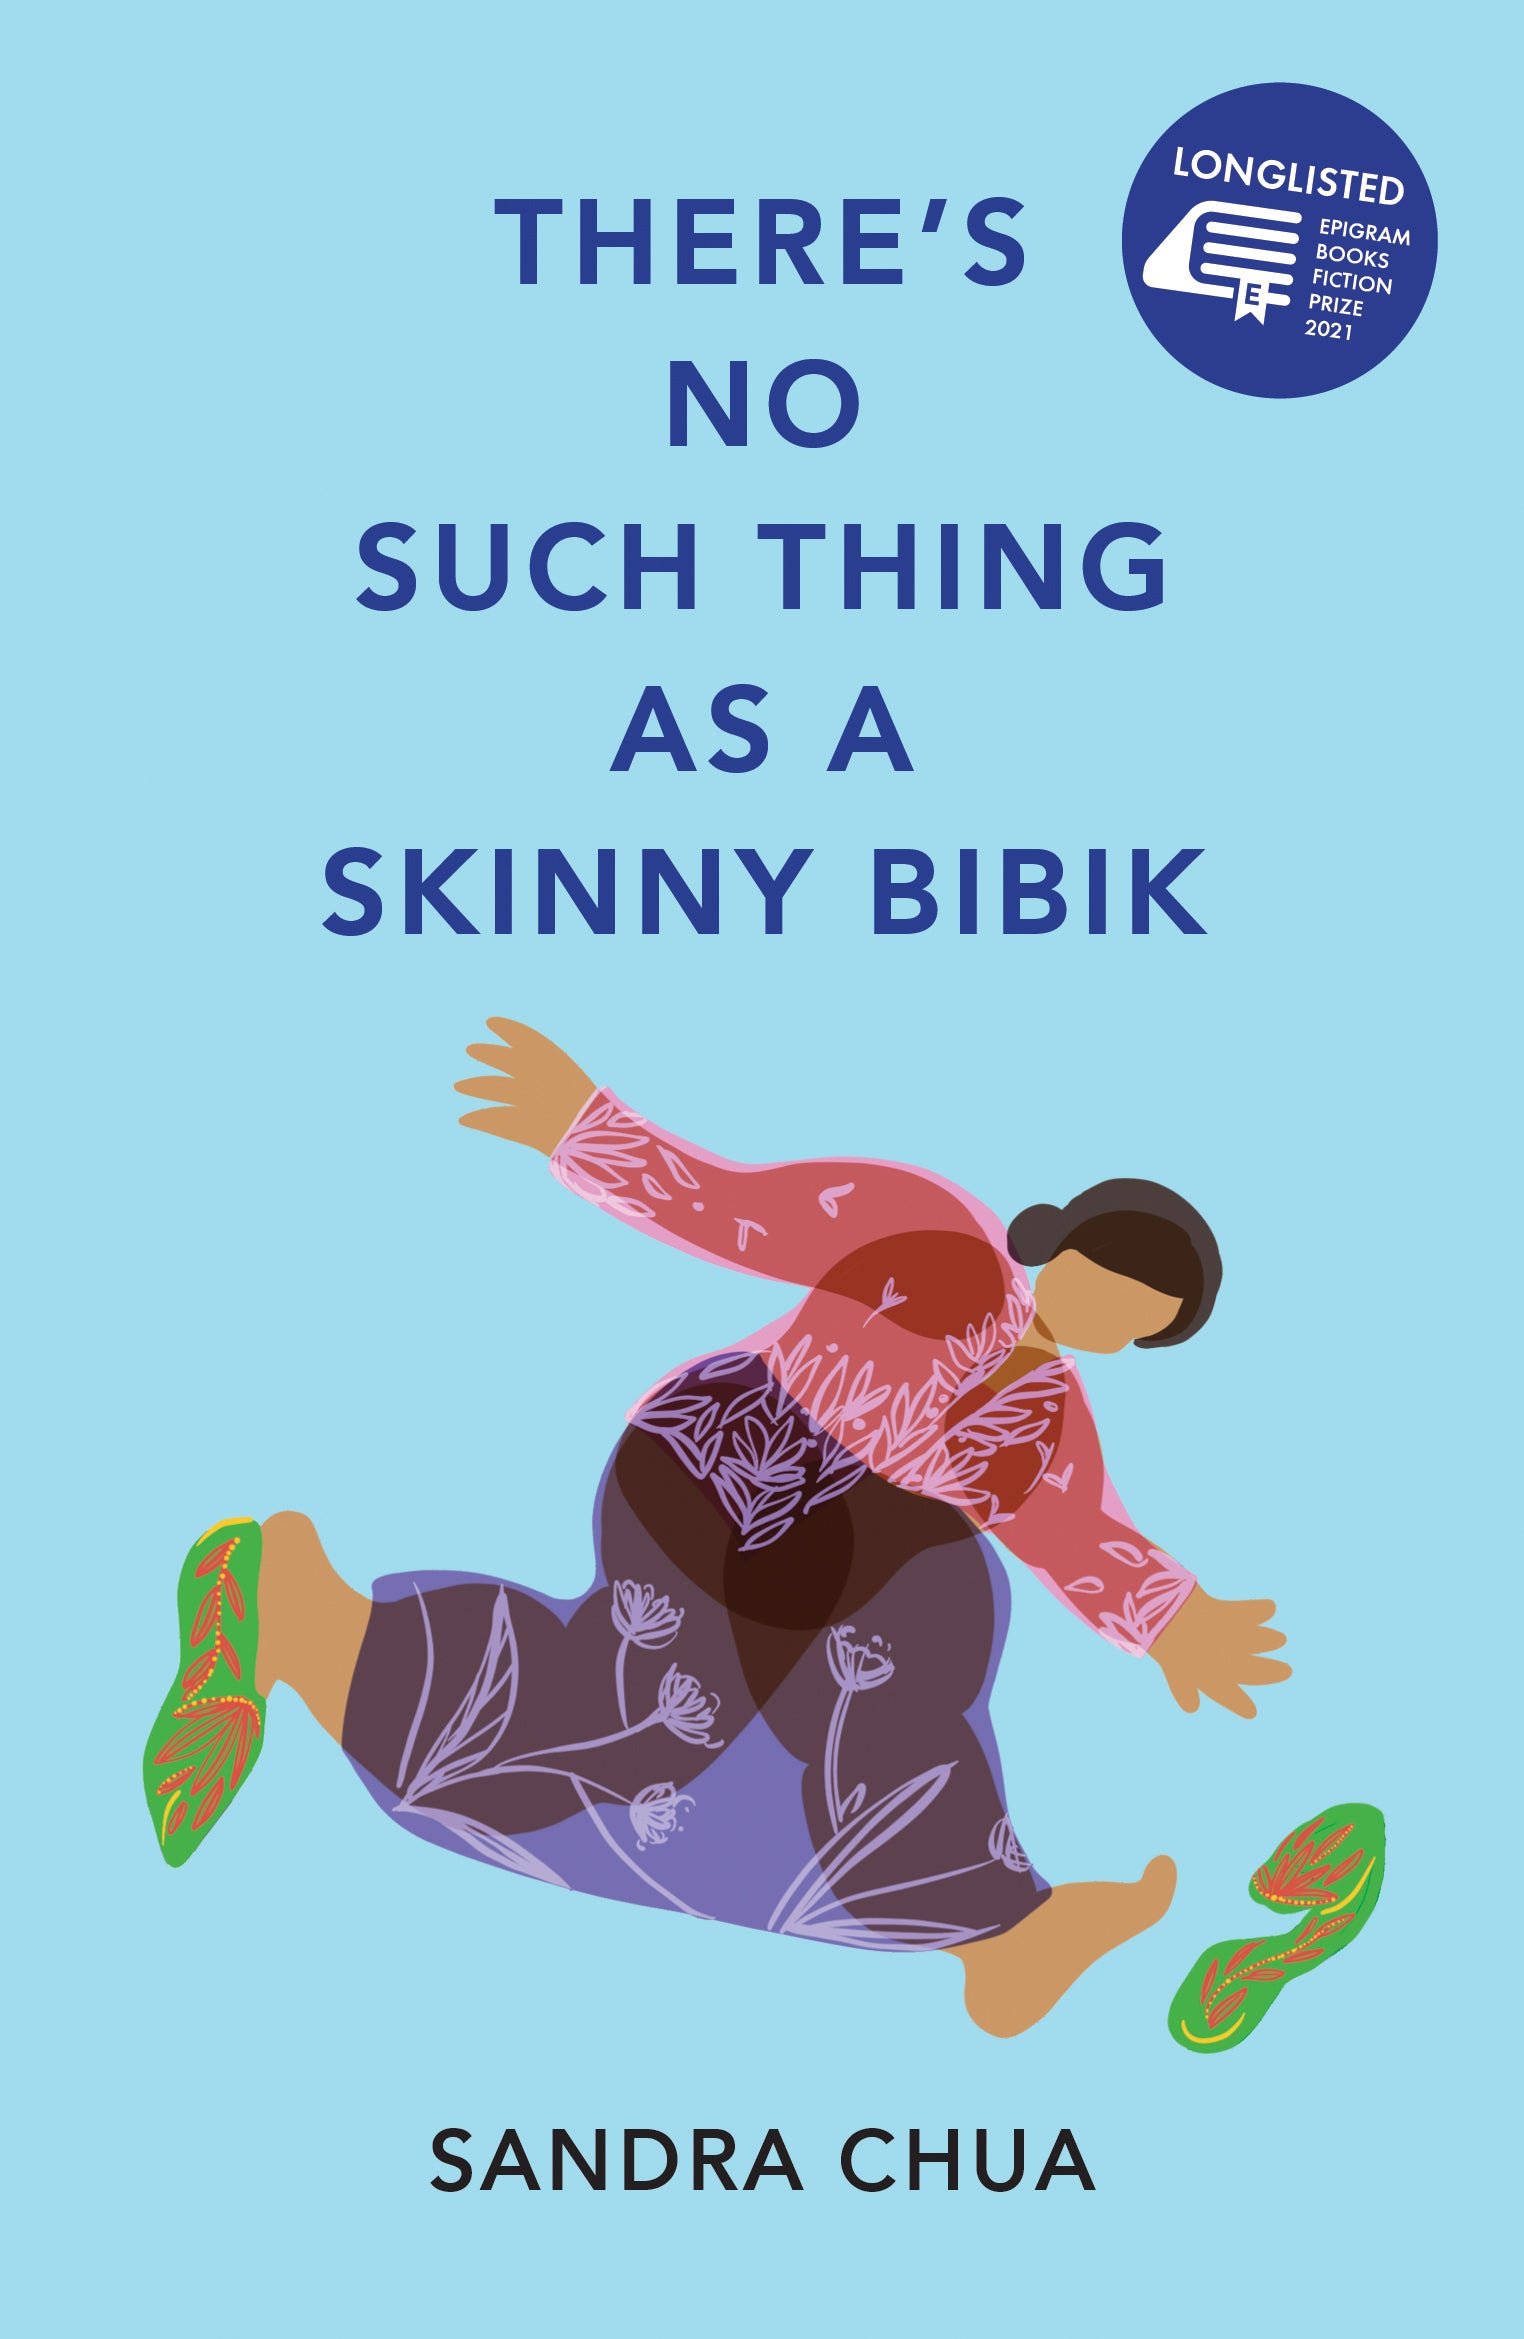 There's No Such Thing as a Skinny Bibik (Original Cover)